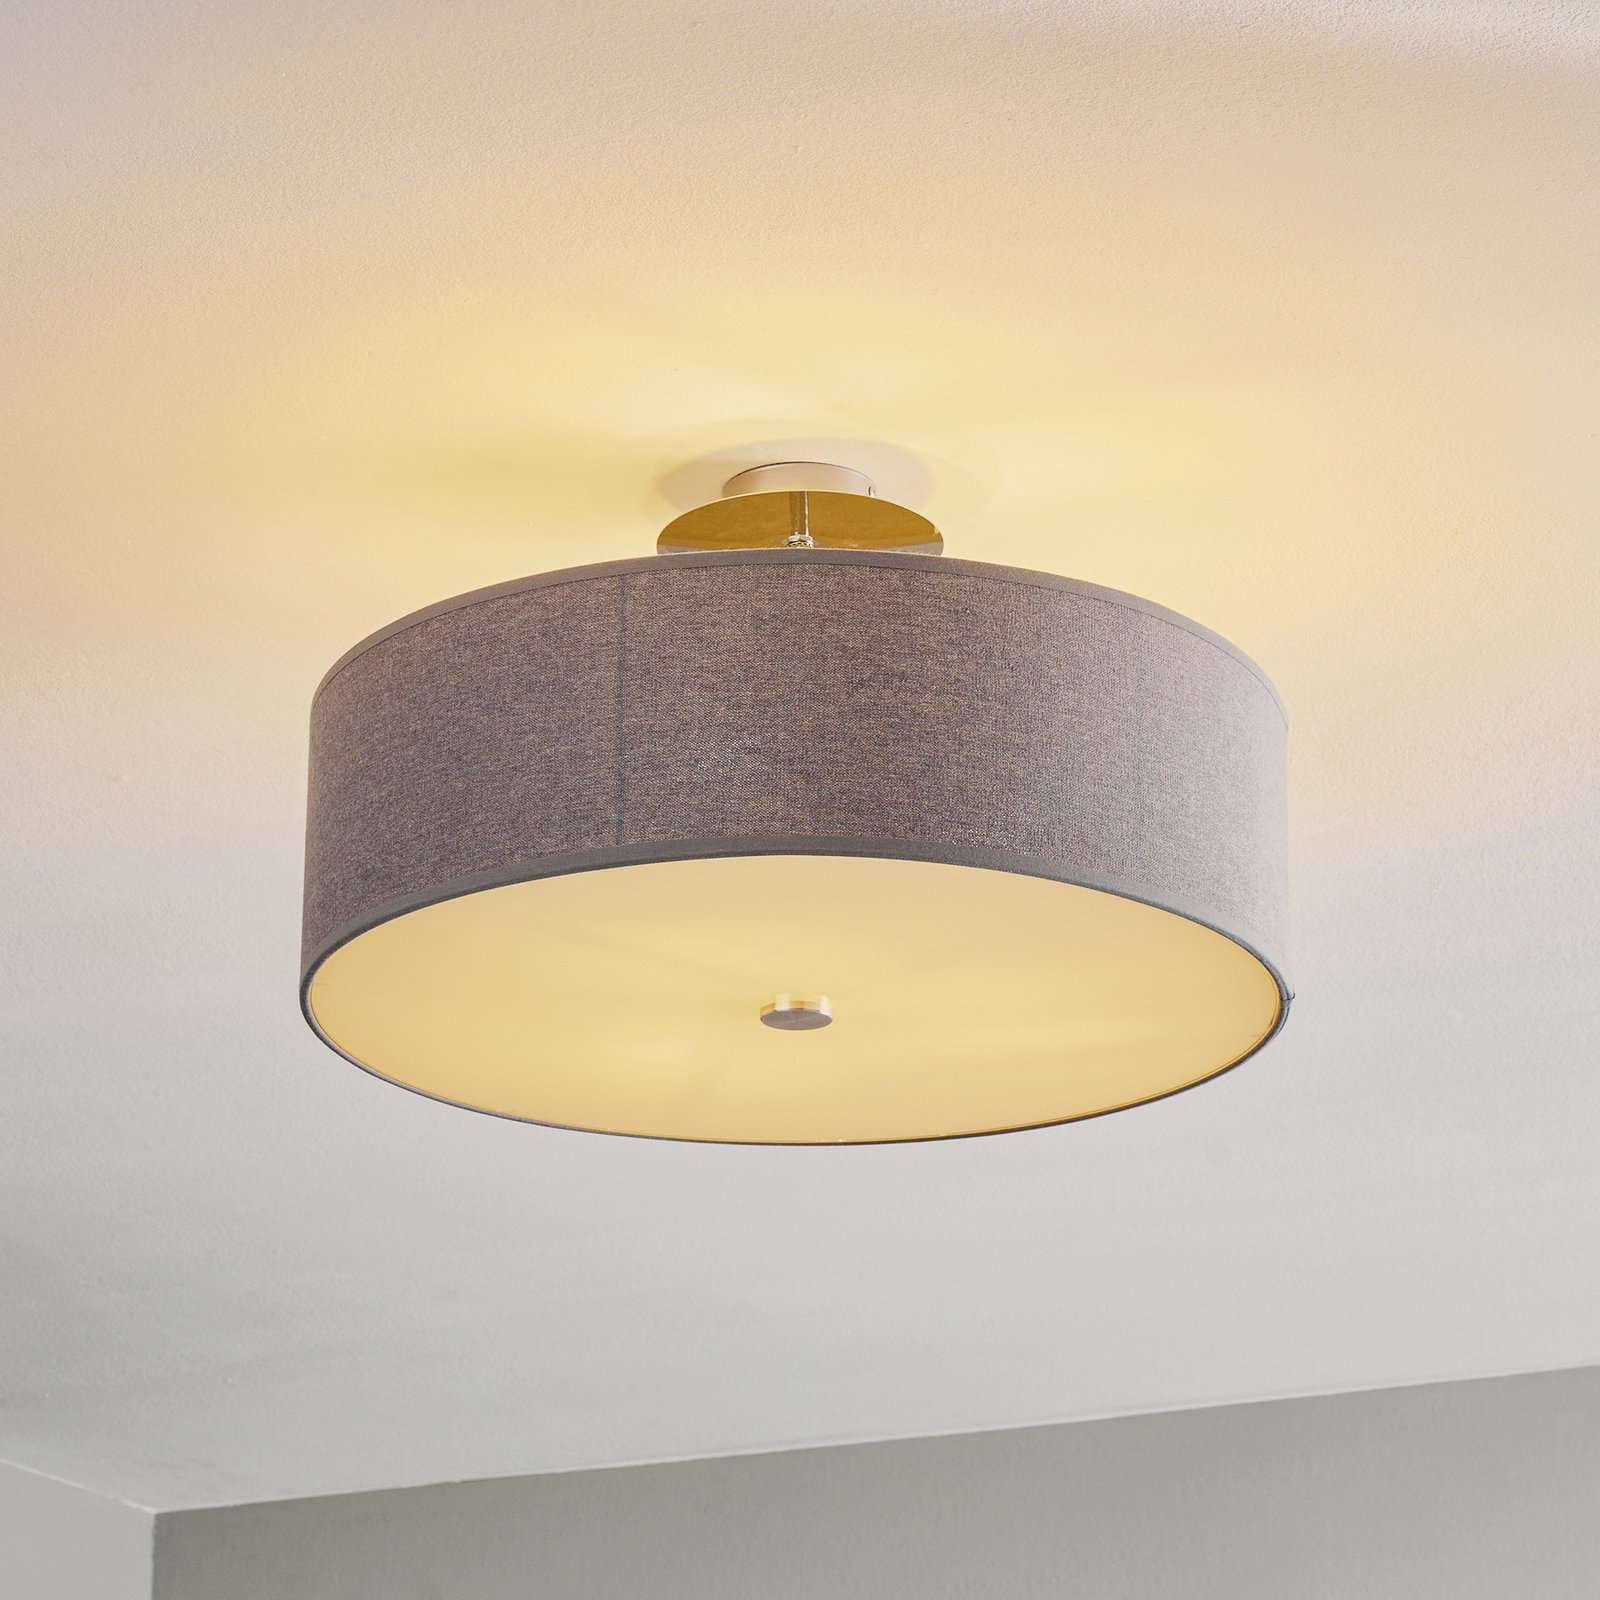 Viviane ceiling light with textile shade, grey